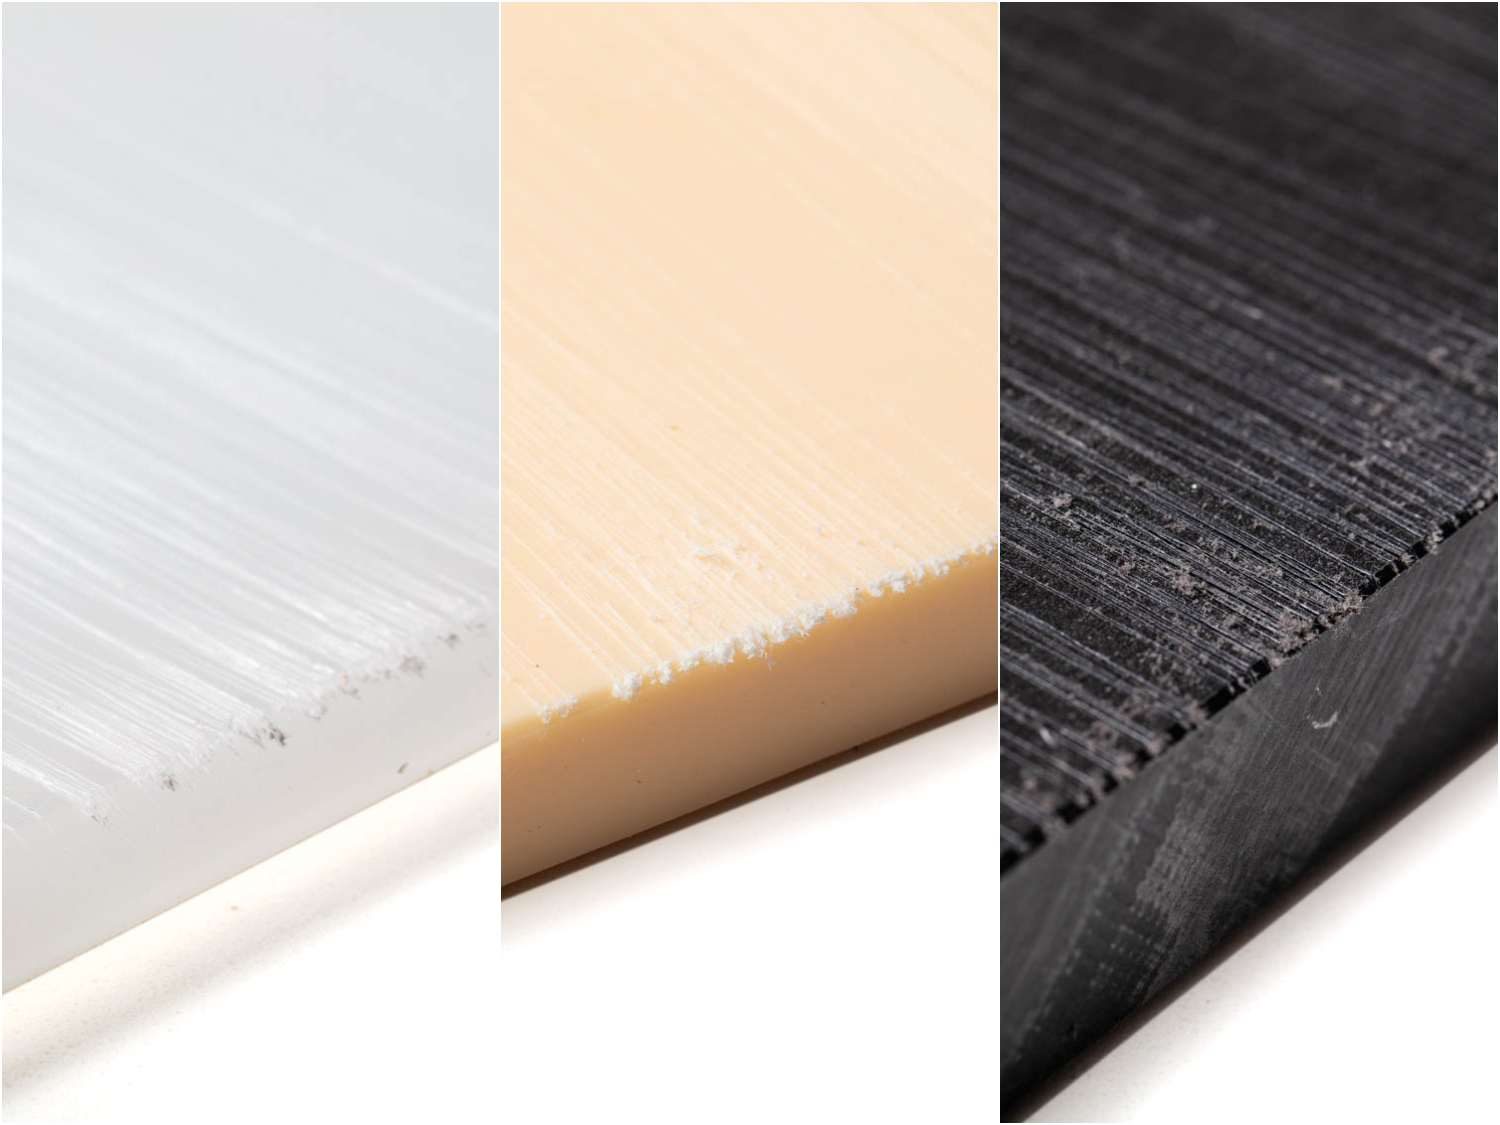 Which plastic cutting board material is most durable? This composite shot shows the knife damage to three examples.